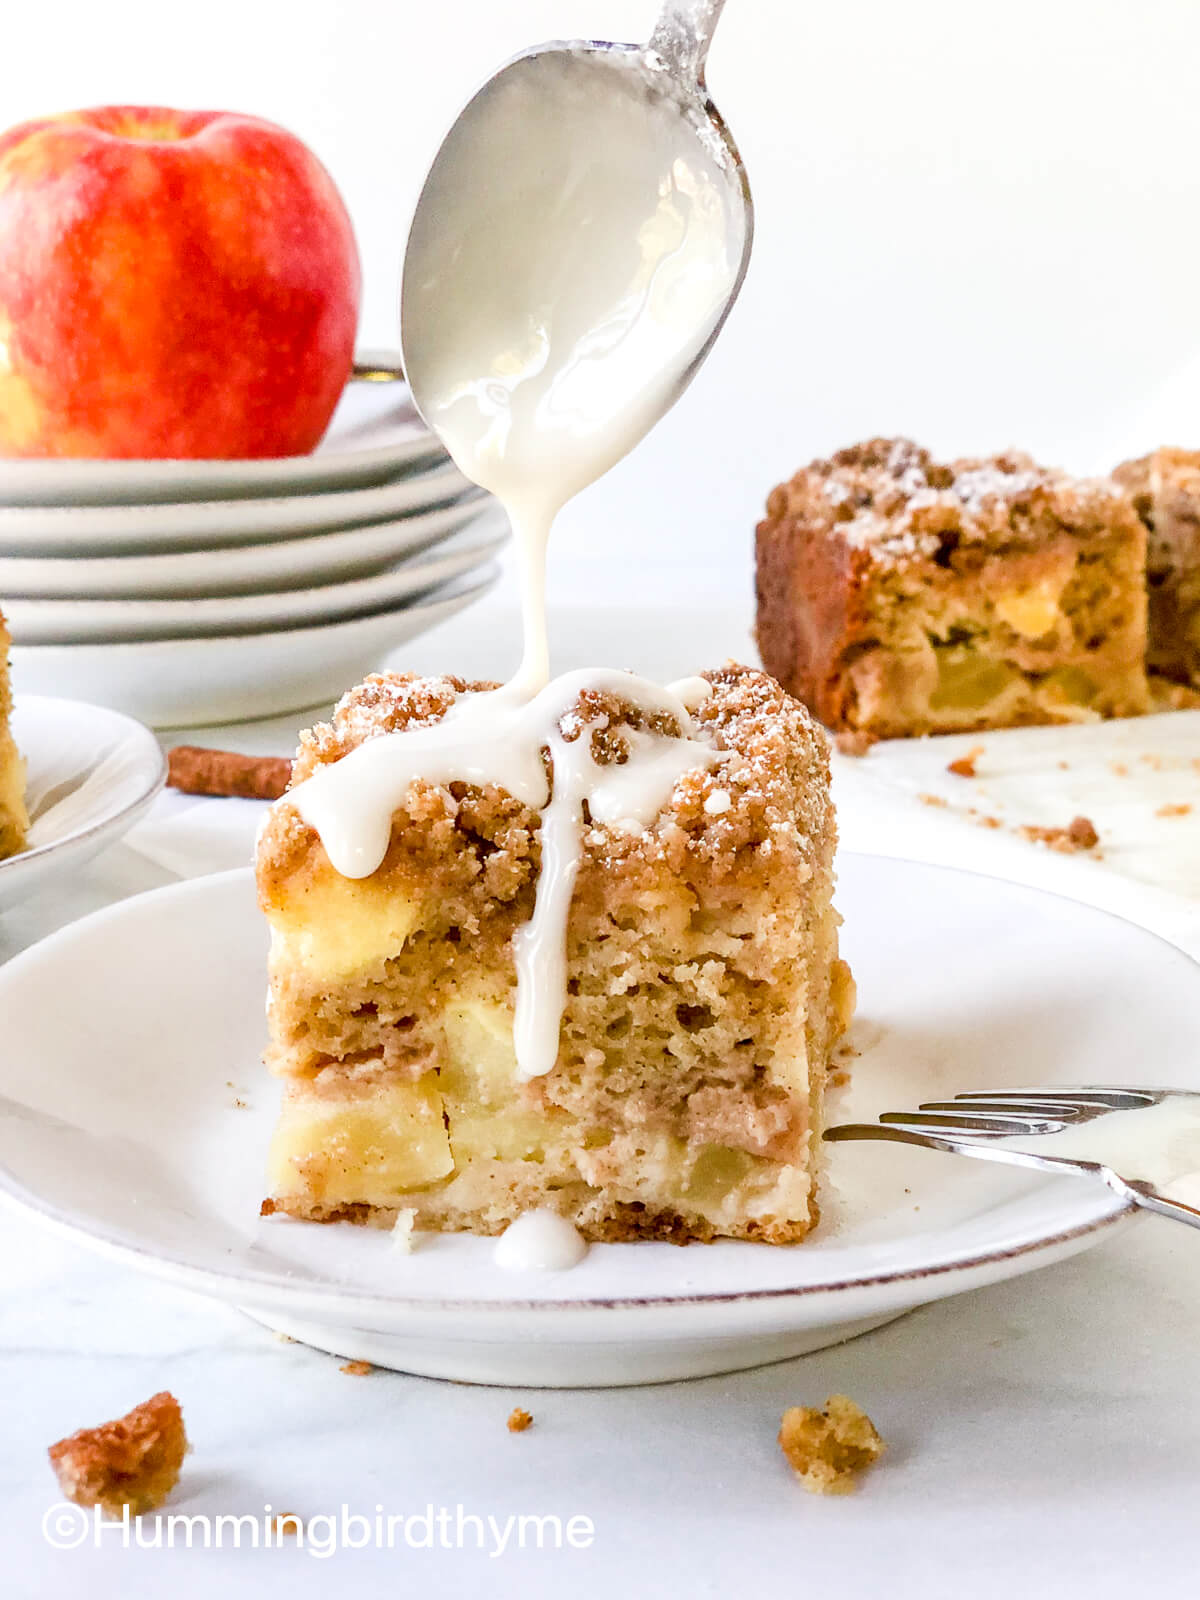 Apple Crumb Cake - Pies and Tacos